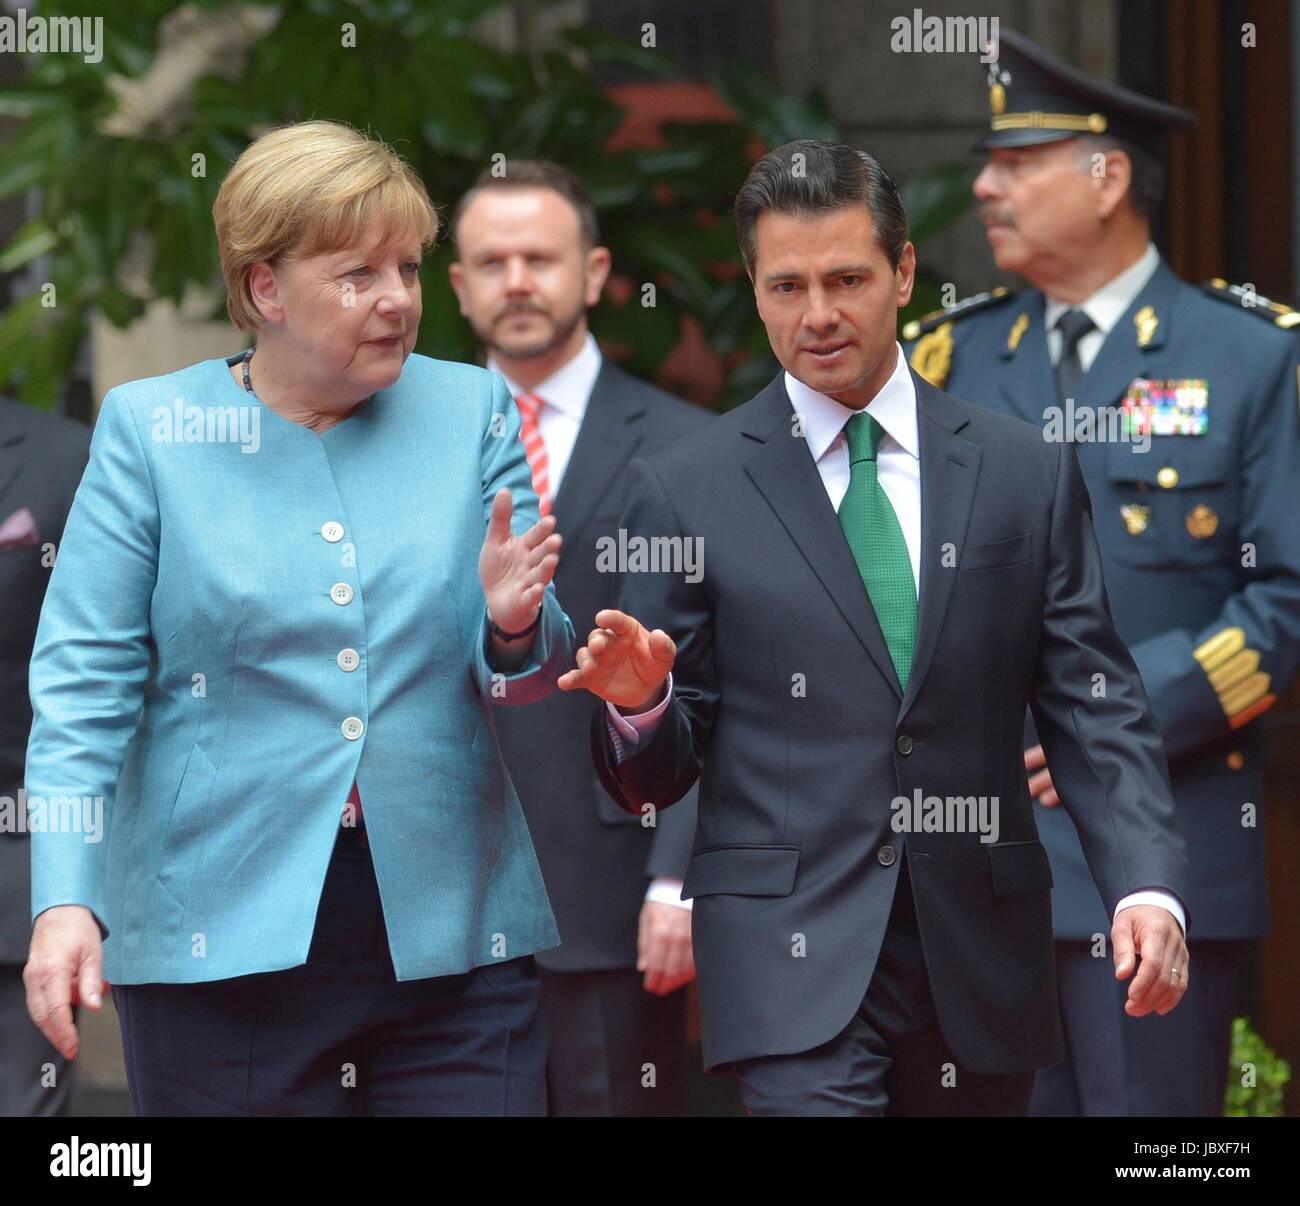 Mexican President Enrique Pena Nieto escorts German Chancellor Angela Merkel following the arrival ceremony at the National Palace at Los Pinos June 9, 2017 in Mexico City, Mexico. Stock Photo